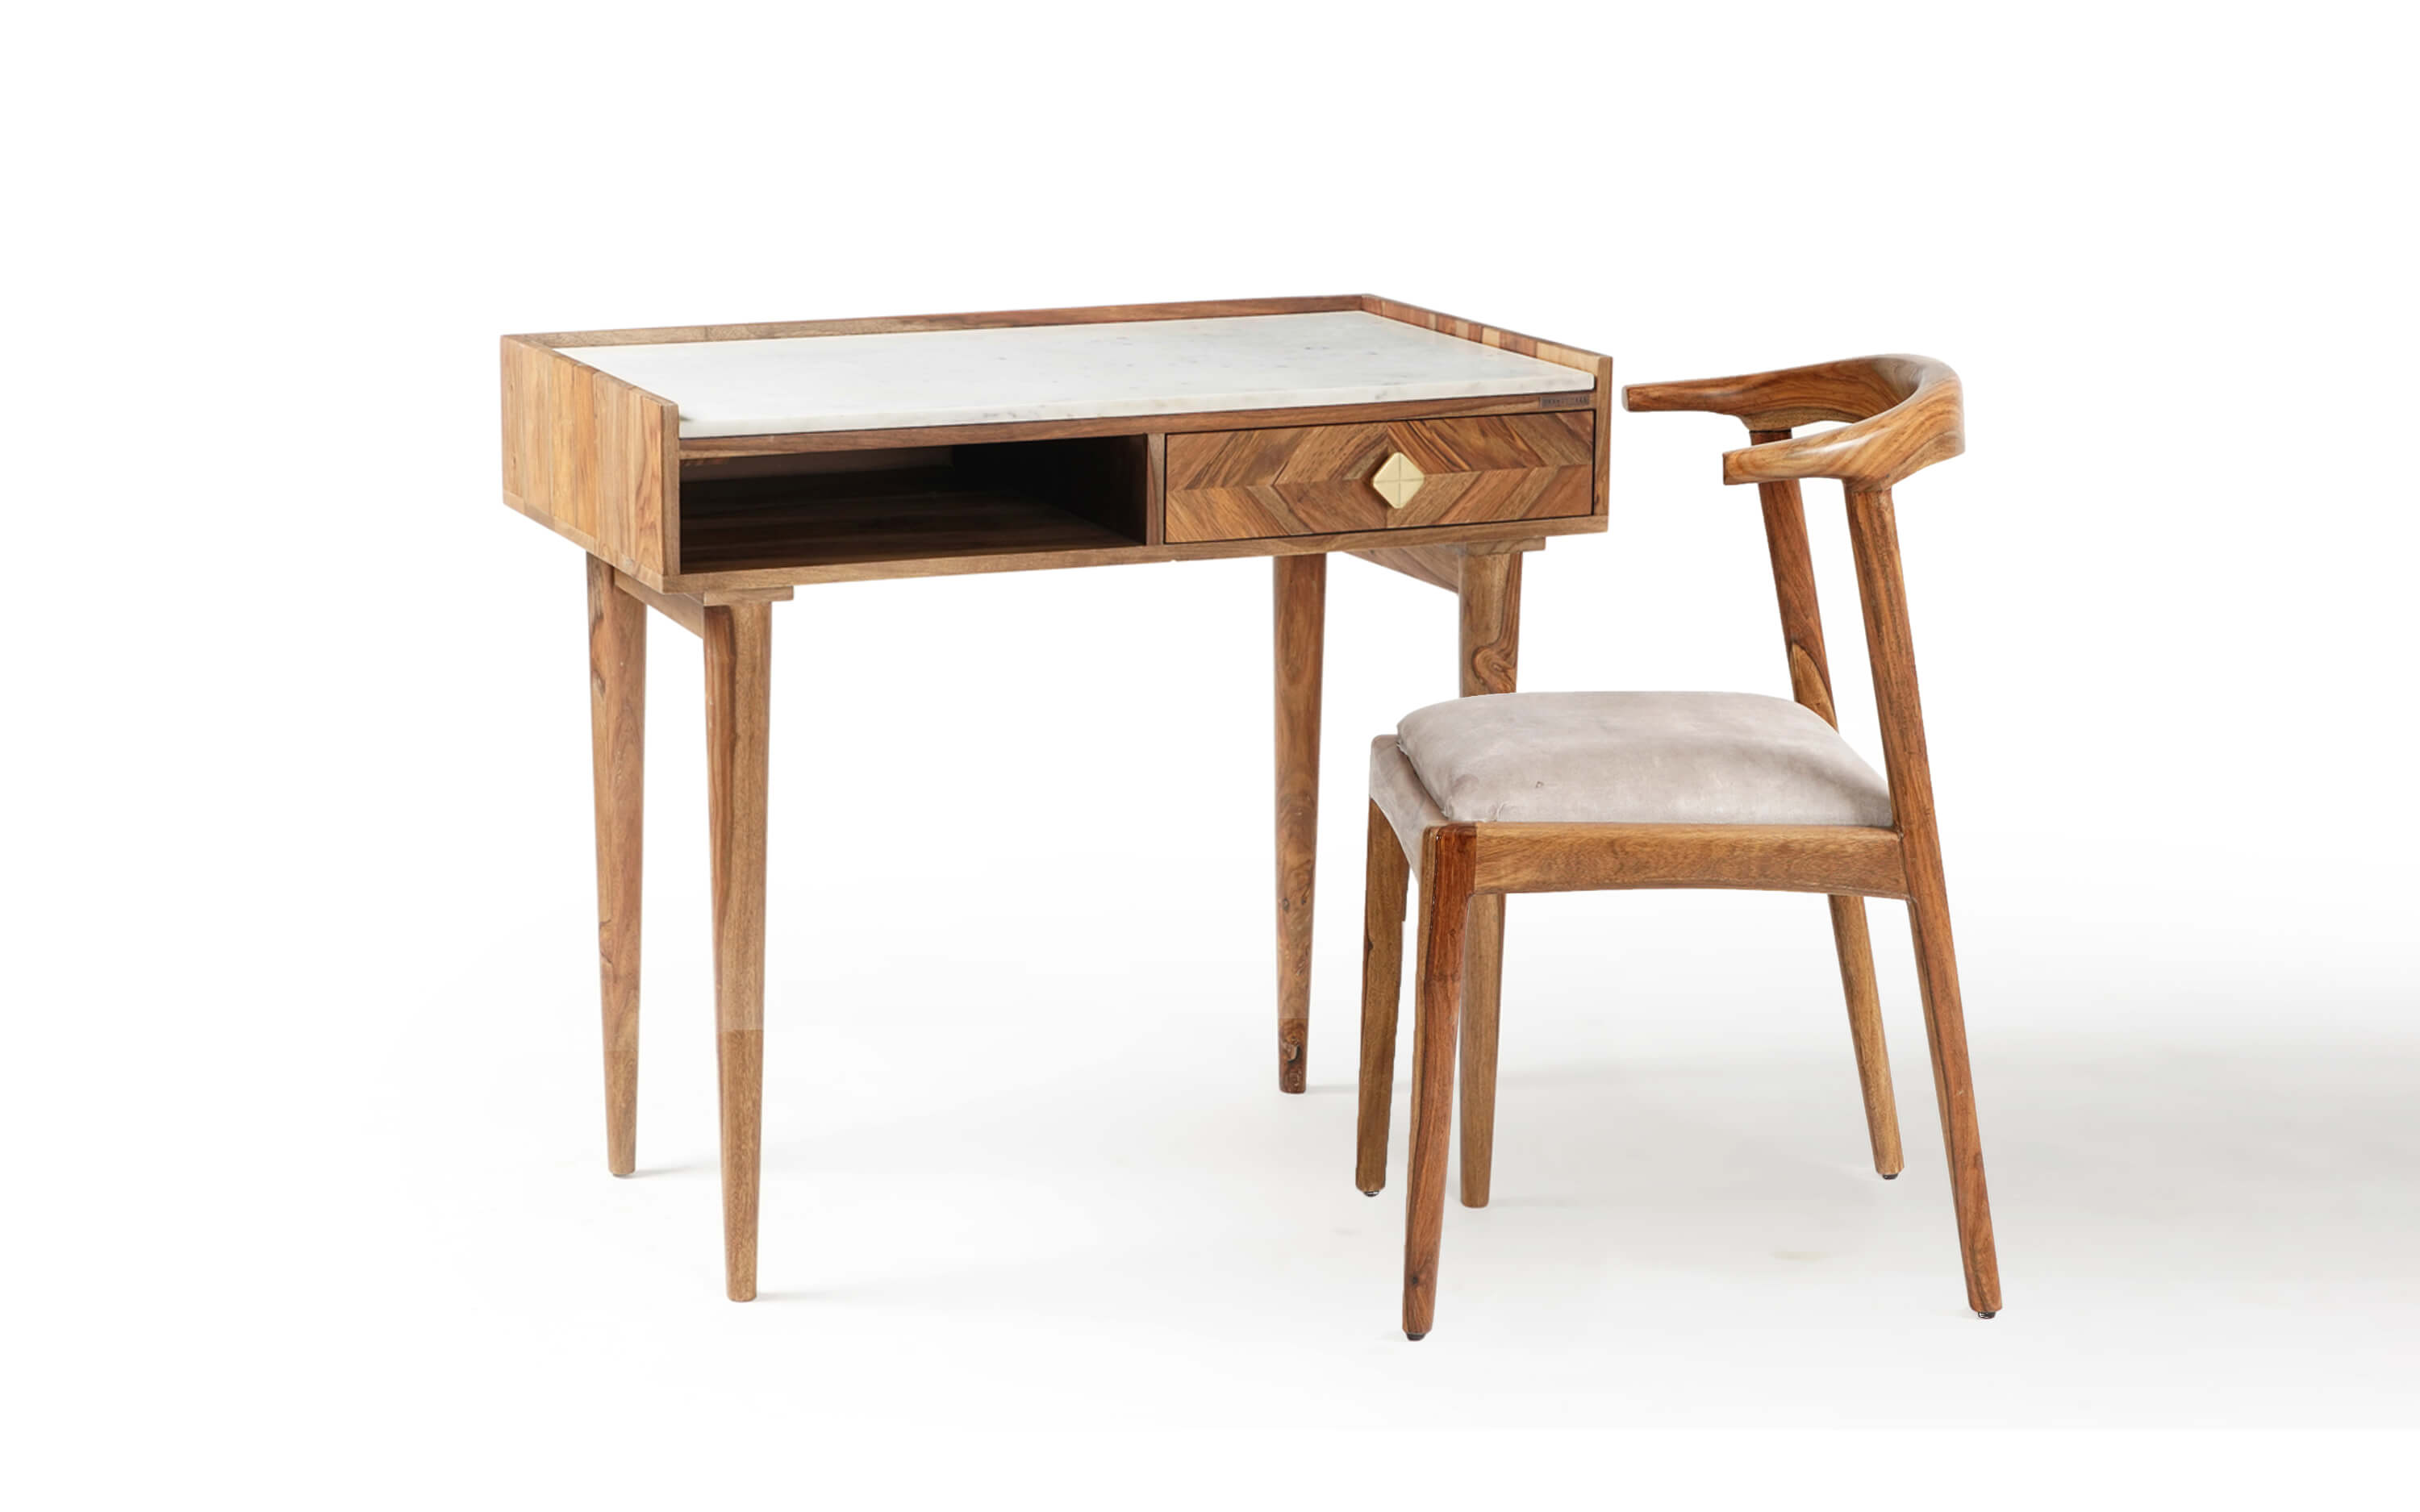 Wooden Study Table and chair. Table featured with Drawer and bookshelf  